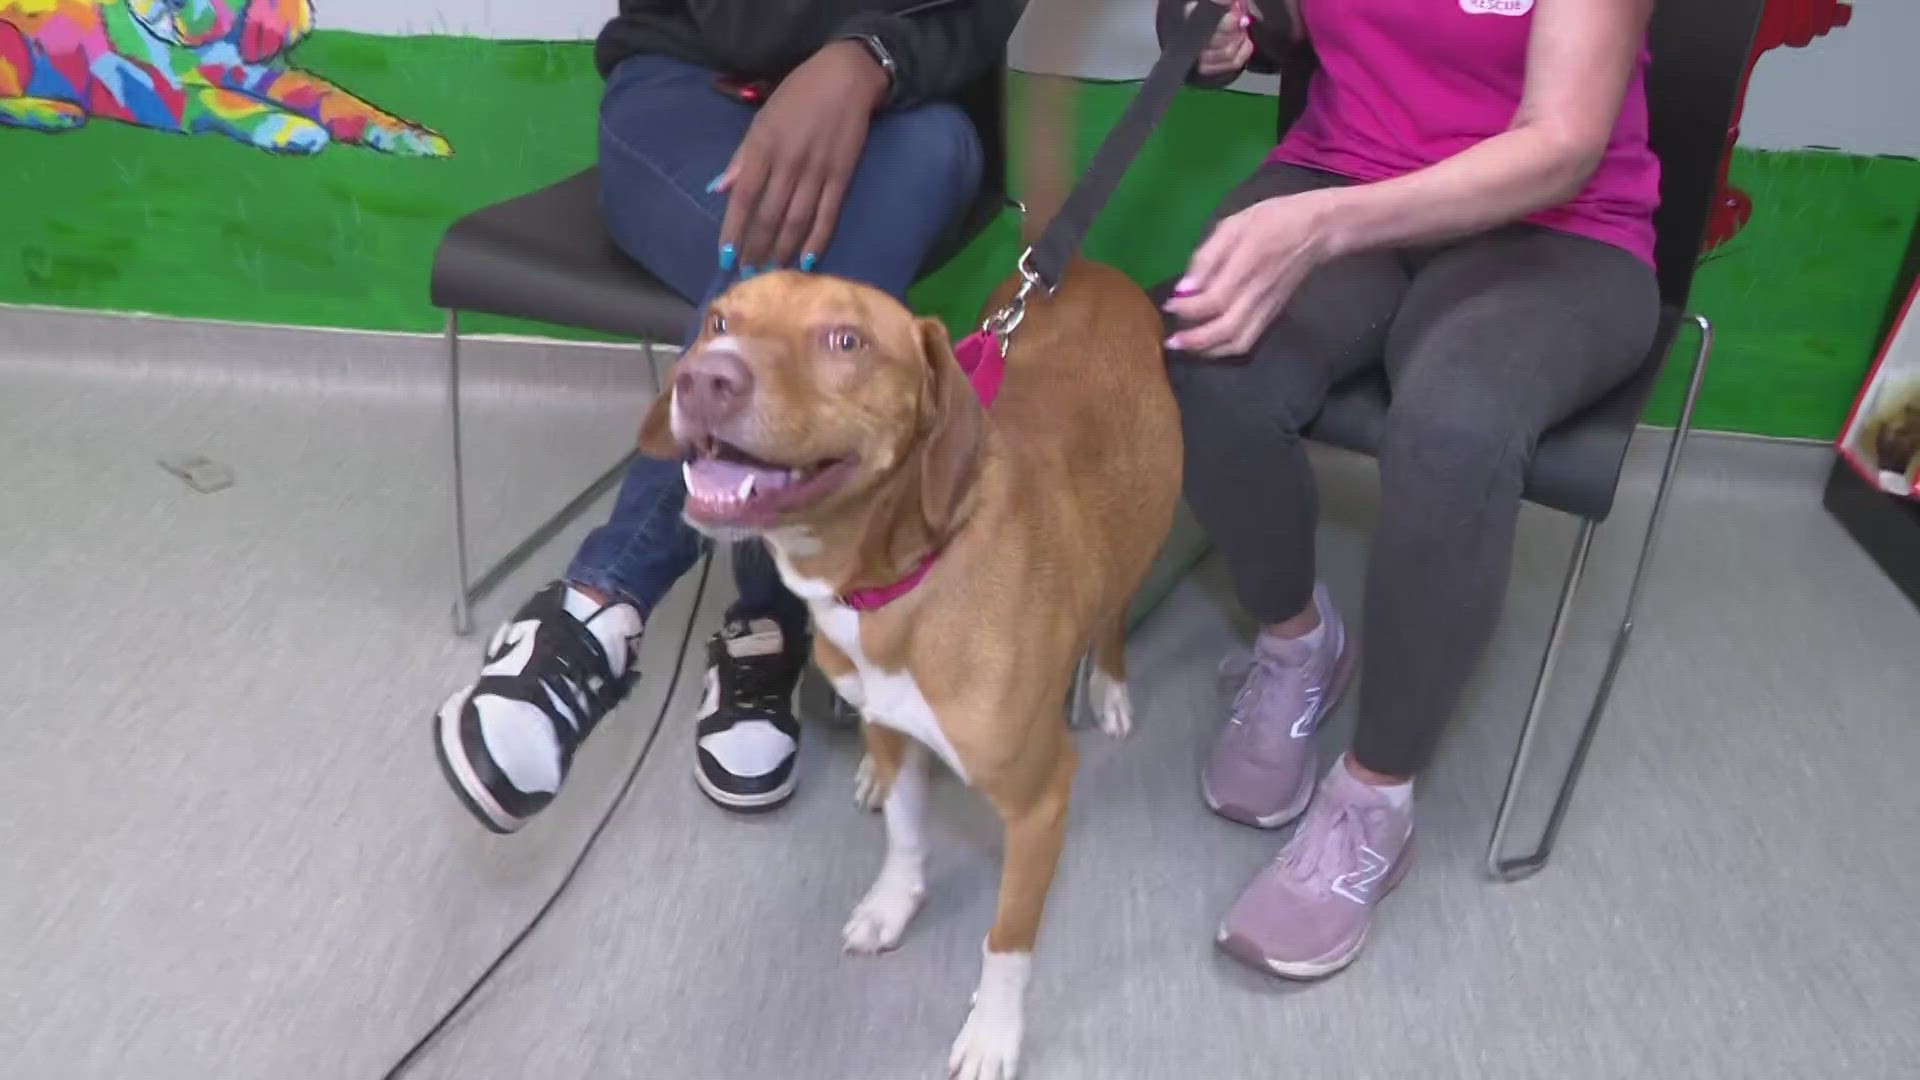 The Berea Animal Rescue is one of many shelters in Northeast Ohio participating in Clear the Shelters. Sammy is up for adoption from the Berea Animal Rescue.